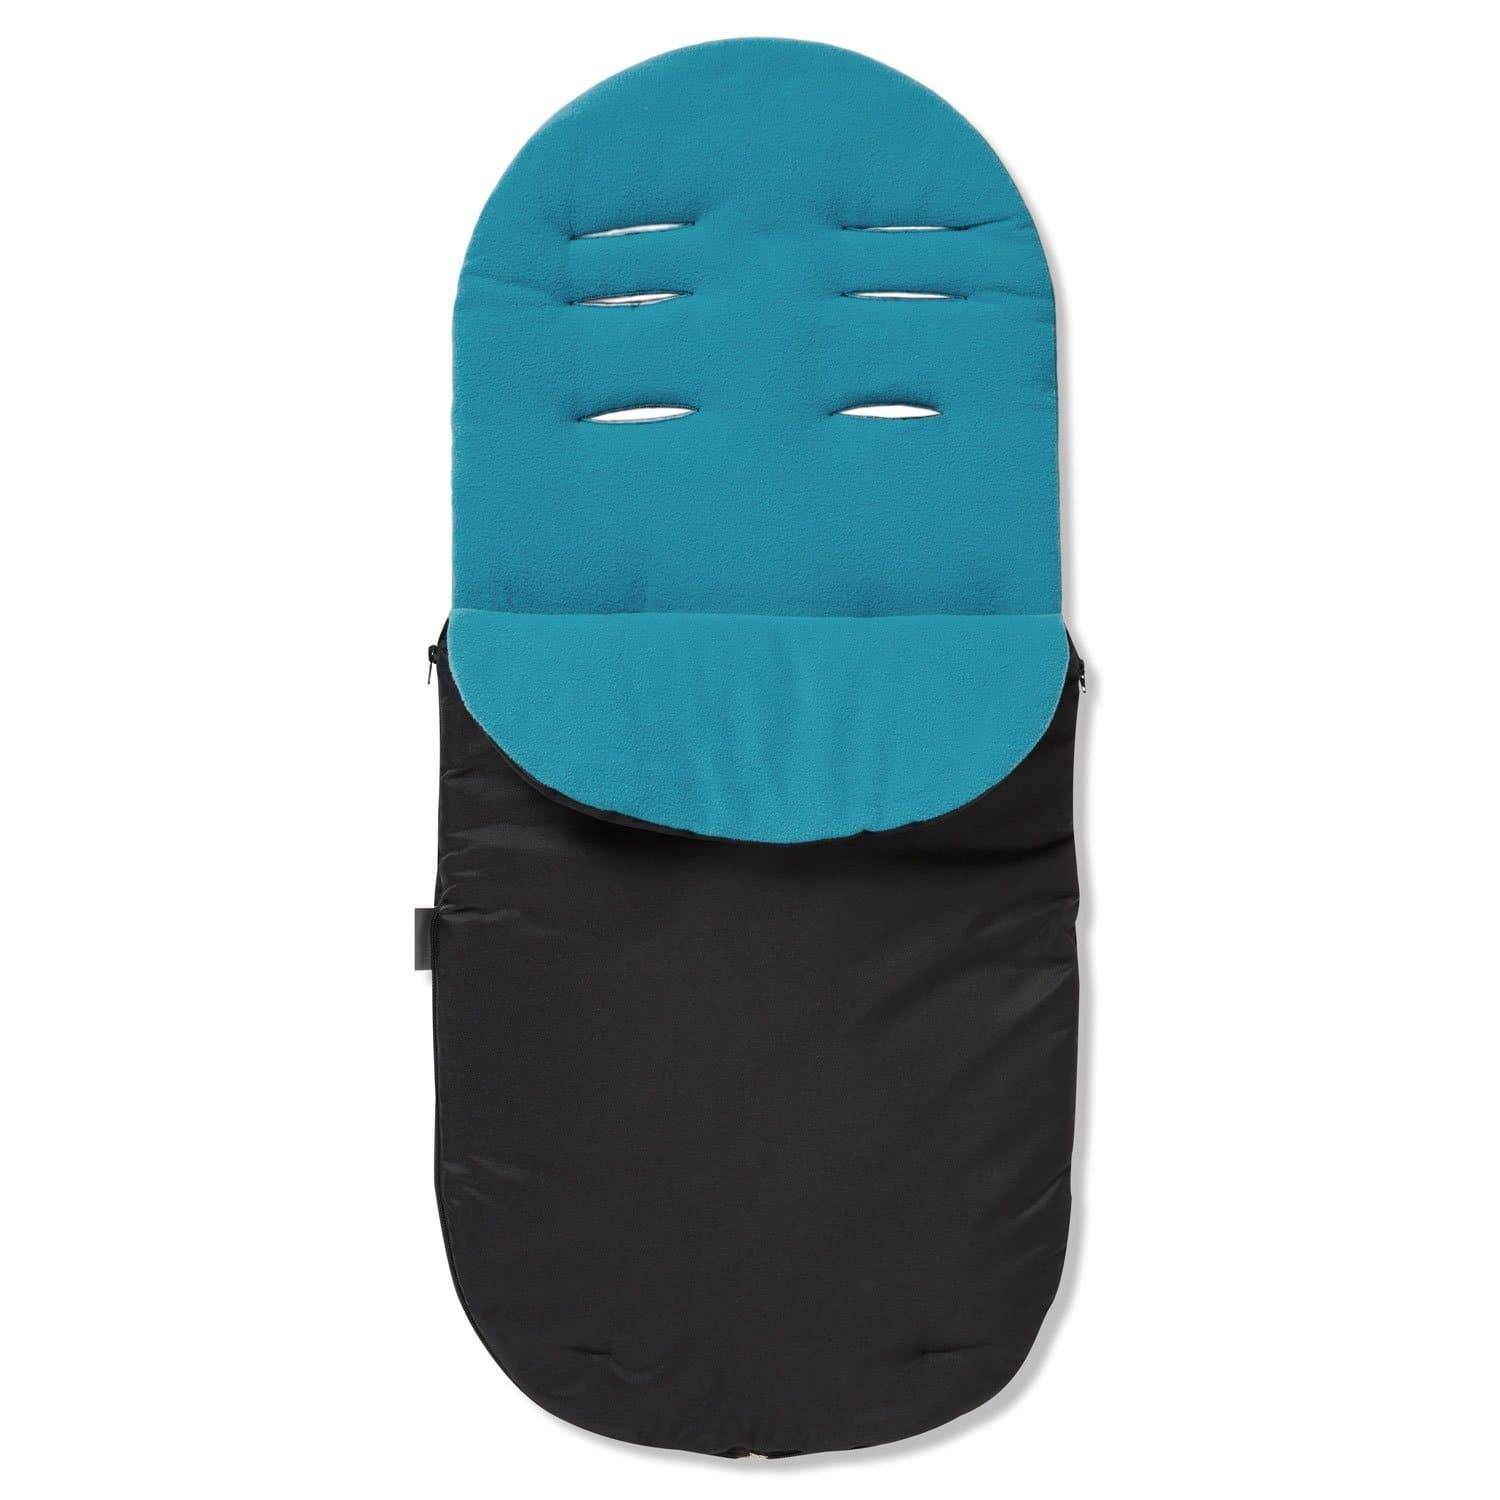 Footmuff / Cosy Toes Compatible with Brevi - Turquoise / Fits All Models | For Your Little One